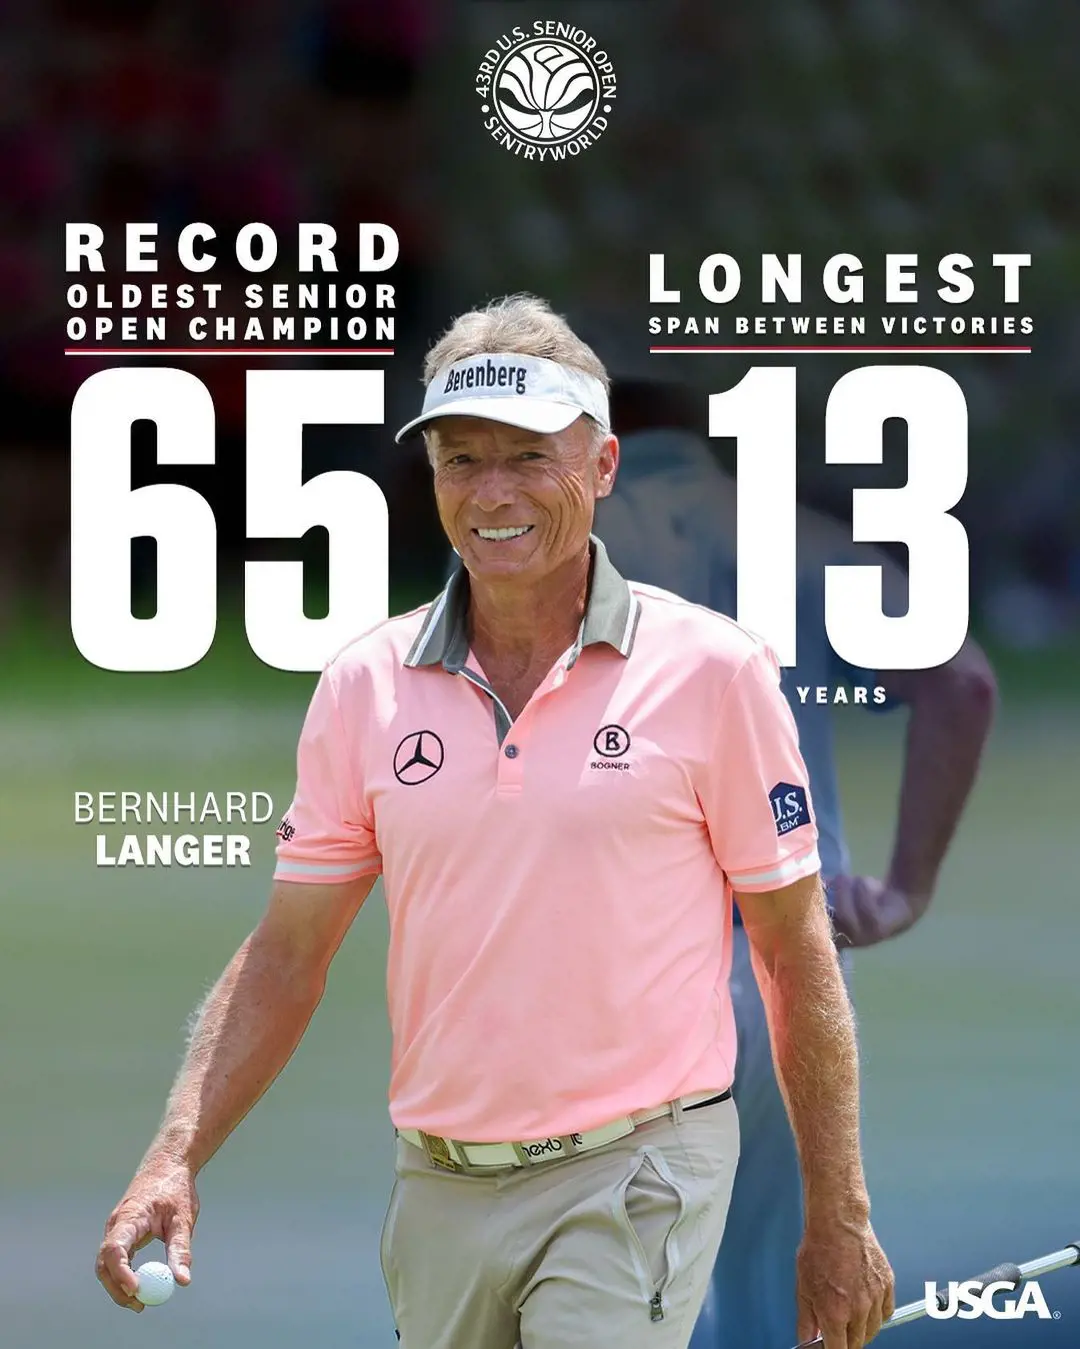 Langer is the oldest senior Open Champion at the age of 65. He secured victory after 13 years of his career.